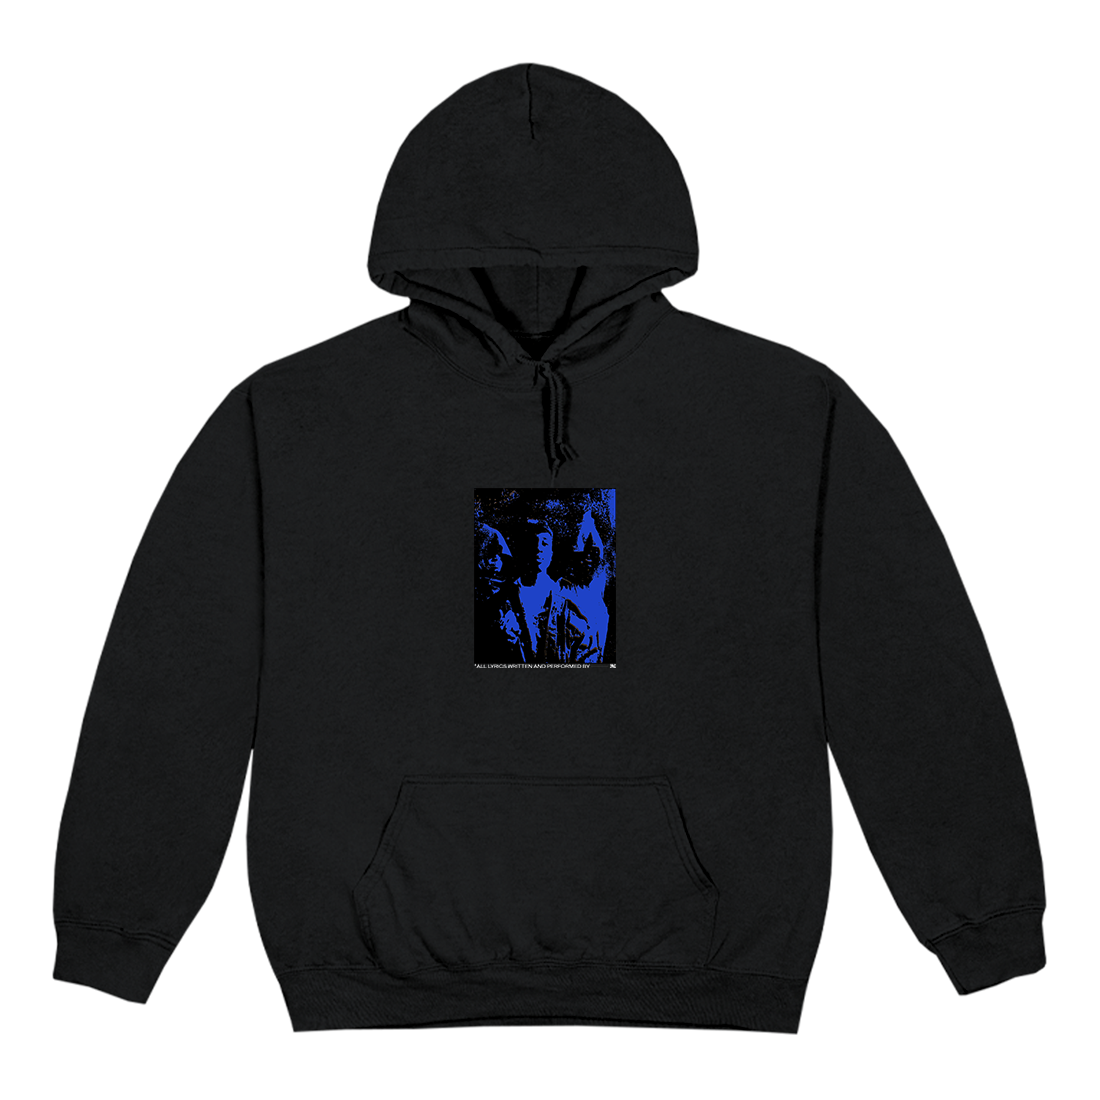 2Pac - 2Pacalypse Now: Exclusive Anniversary Hoodie